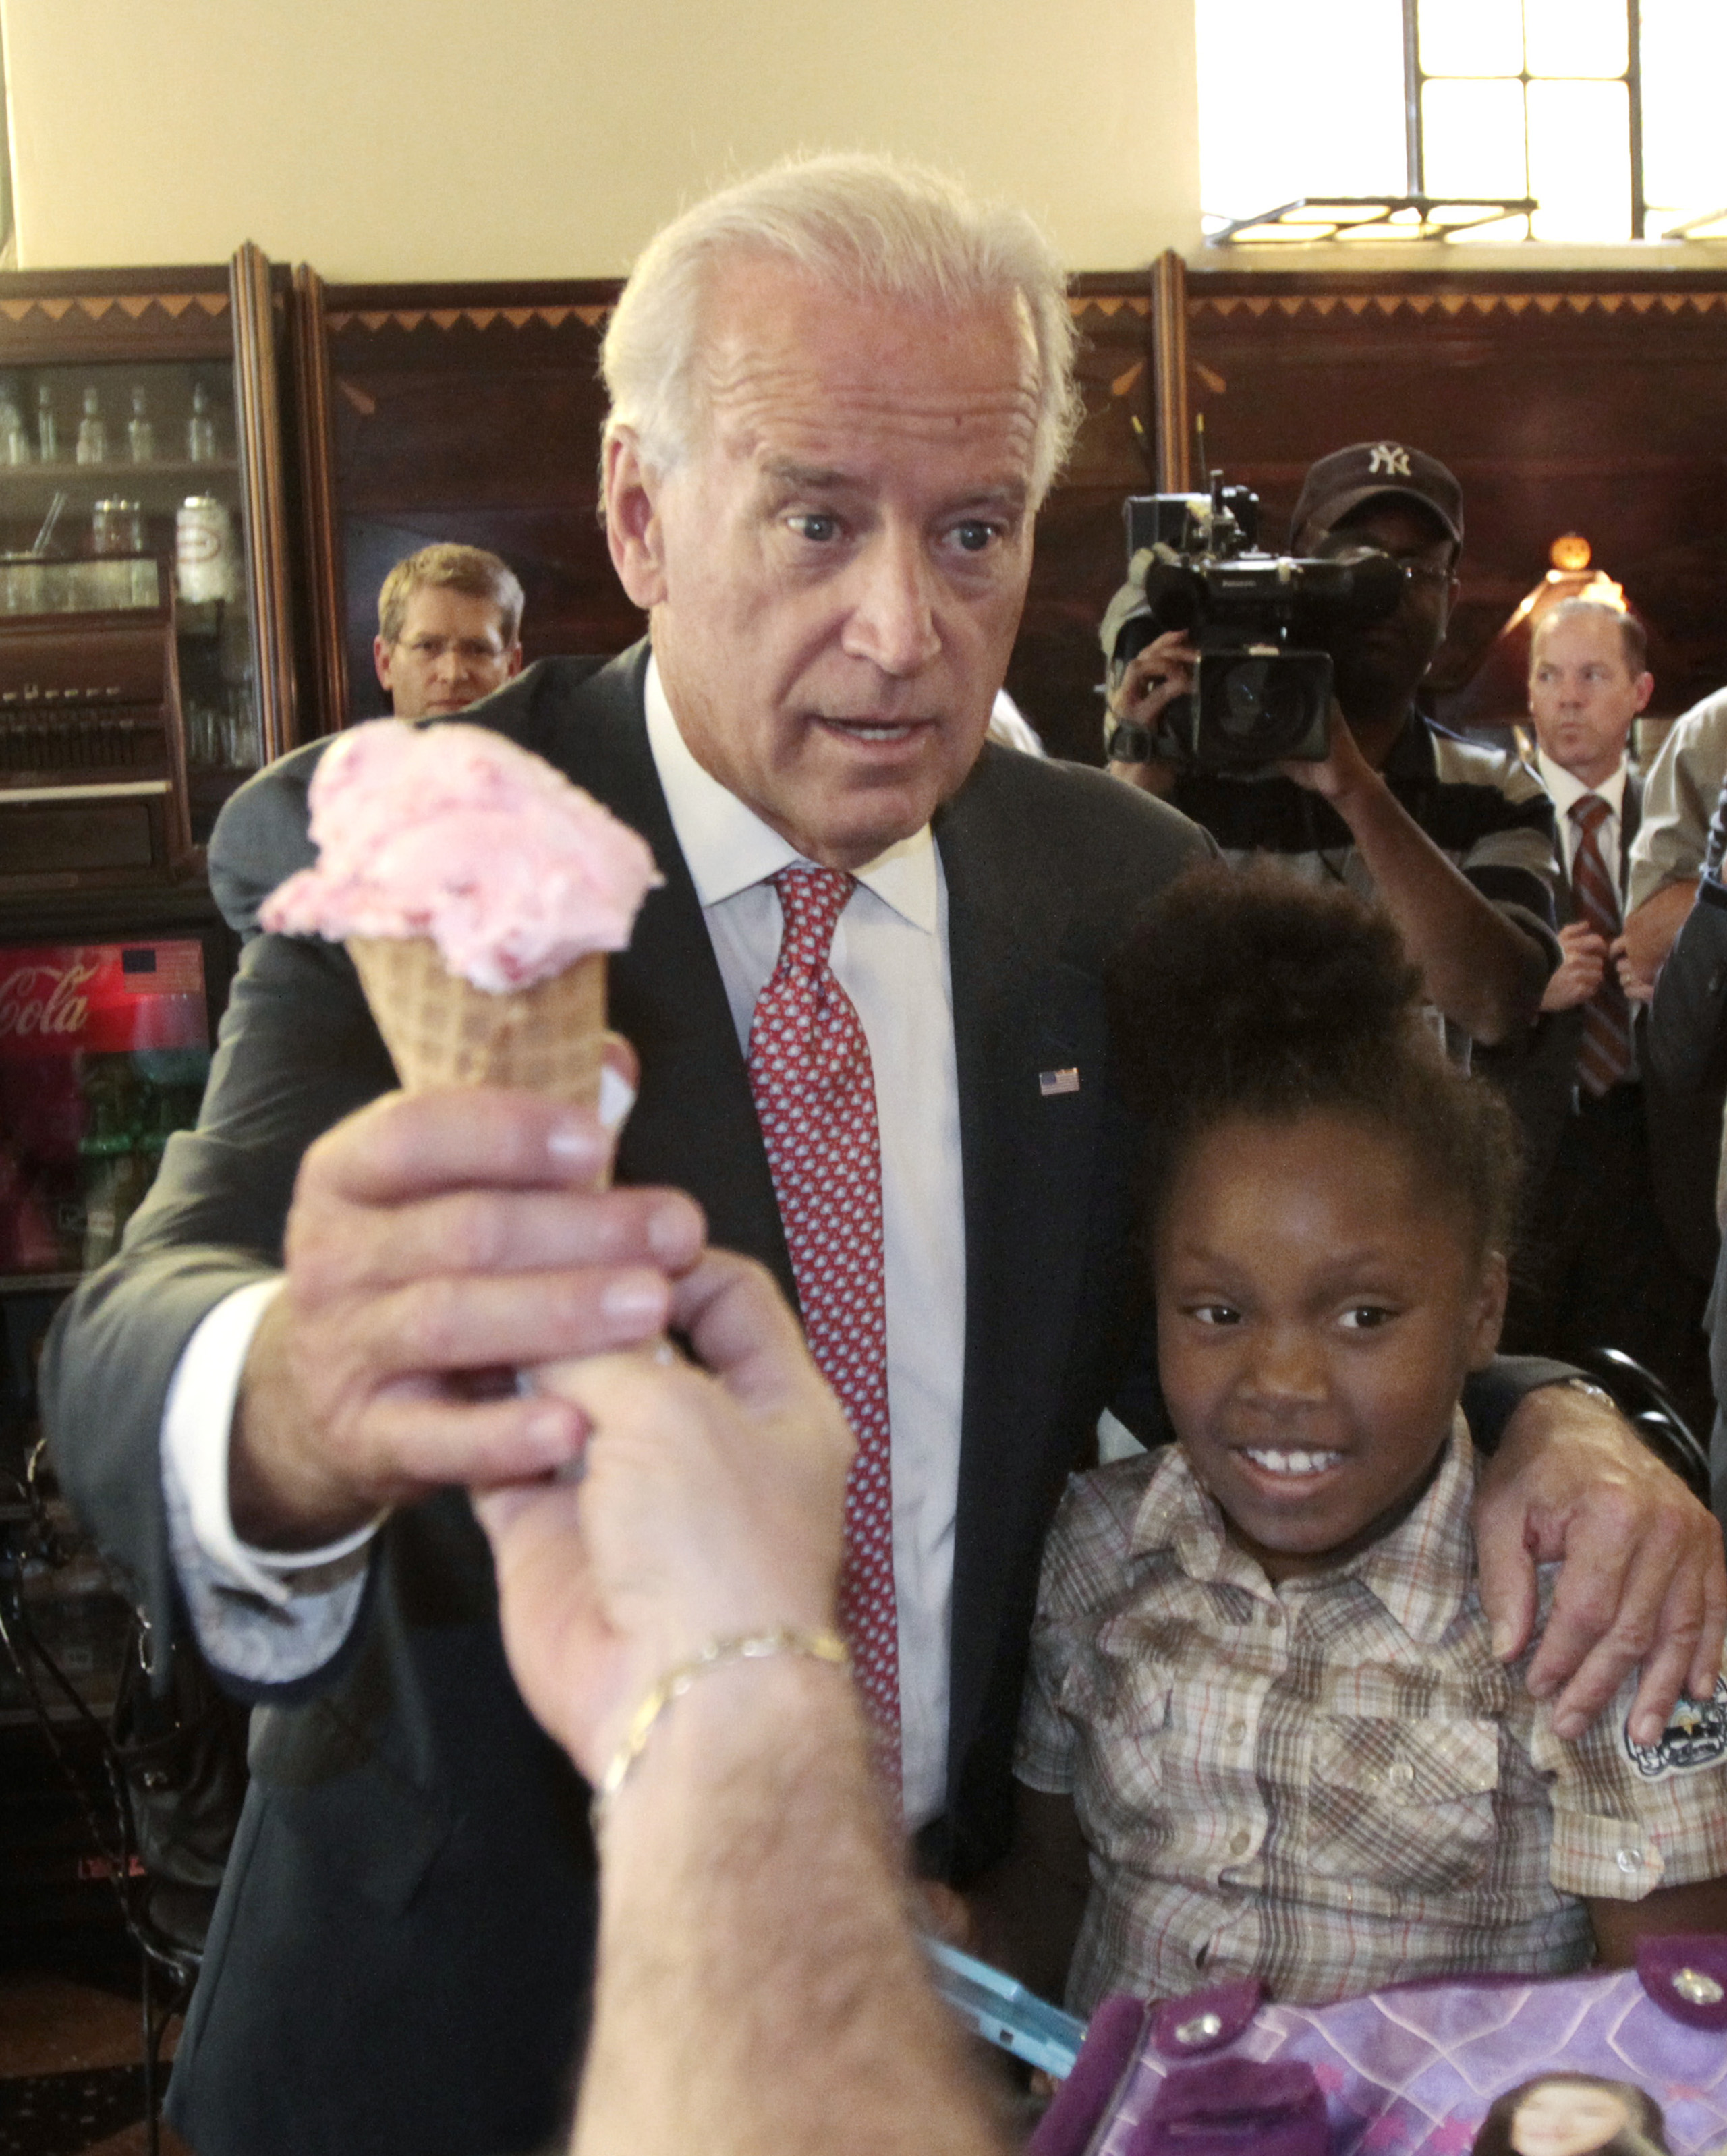 Joe Biden gets a  Whitehouse Cherry  flavored ice-cream cone with his arm around 9-year Dizney Stephens during a visit to Klavon's Authentic 1920's ice cream parlor in Pittsburgh, on Oct. 11, 2010.